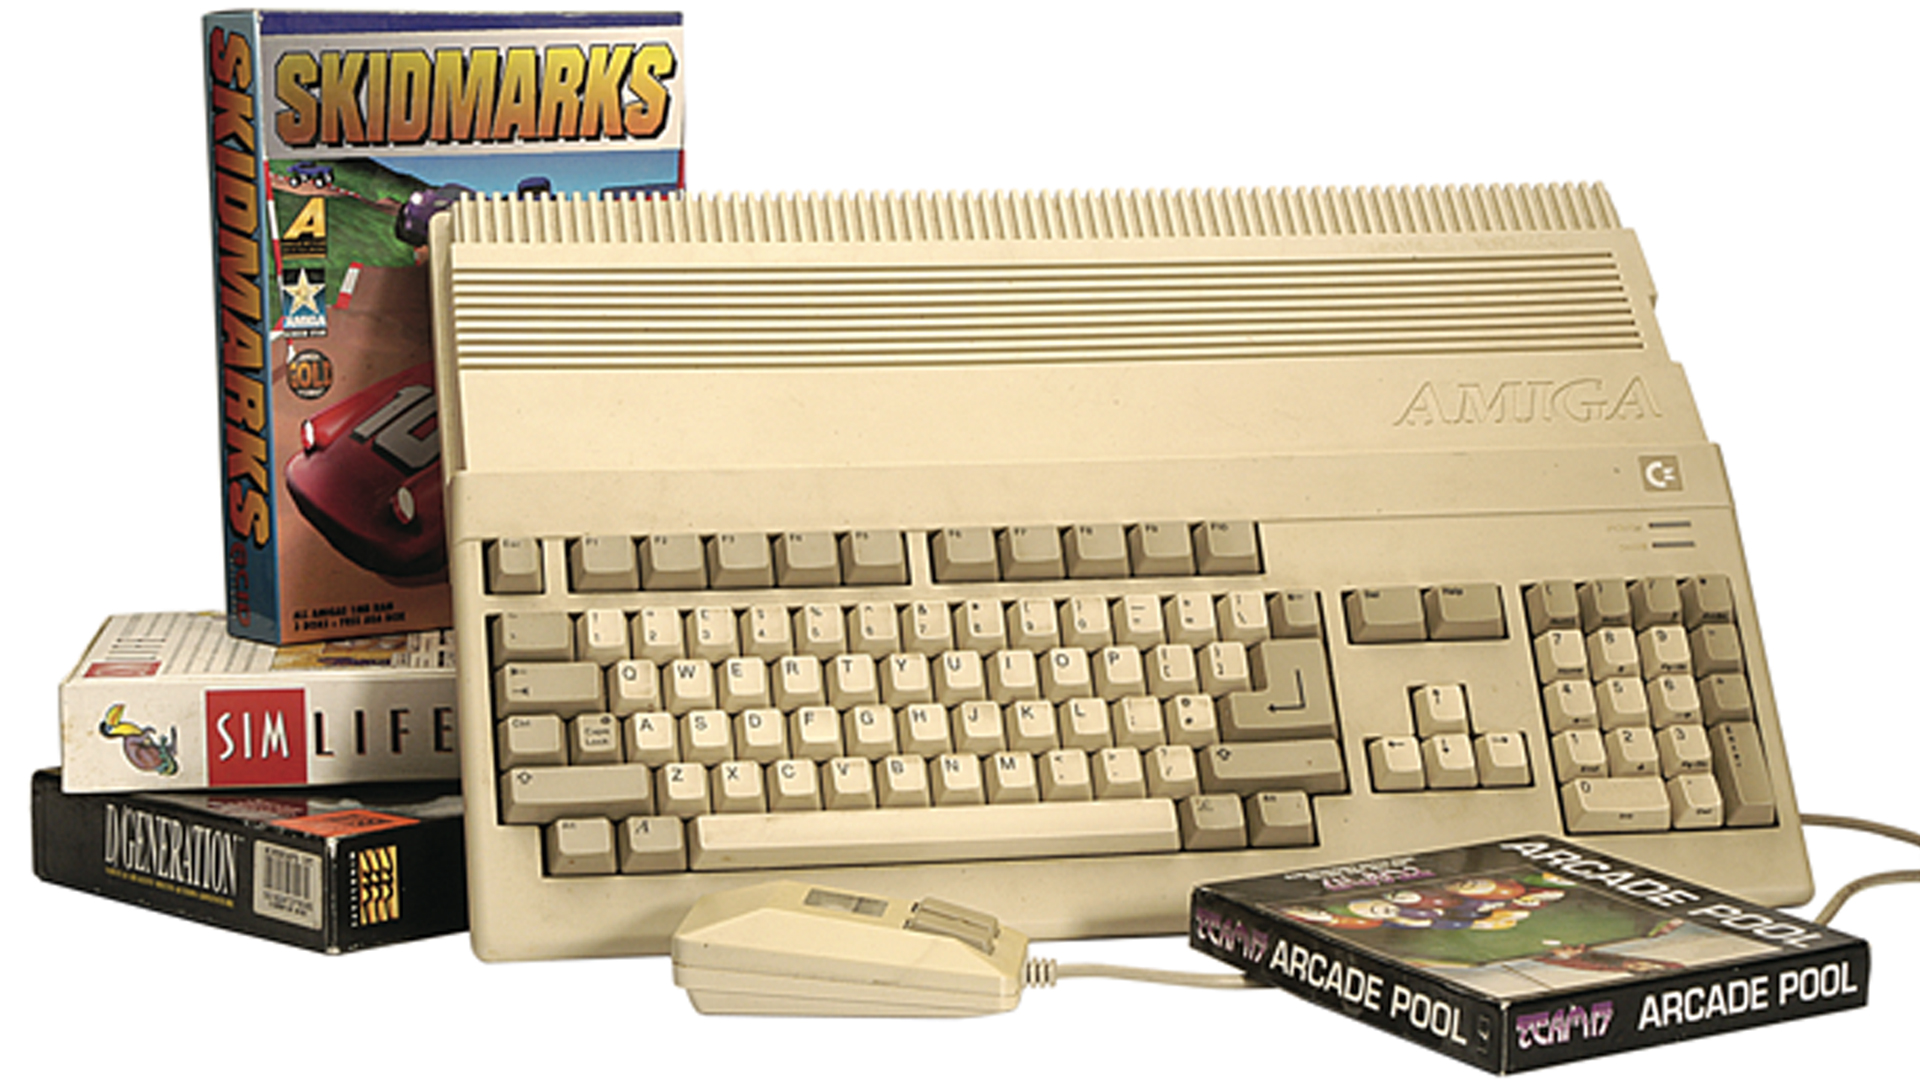 Amiga - The A500 Mini Games - In Order Of Greatness 